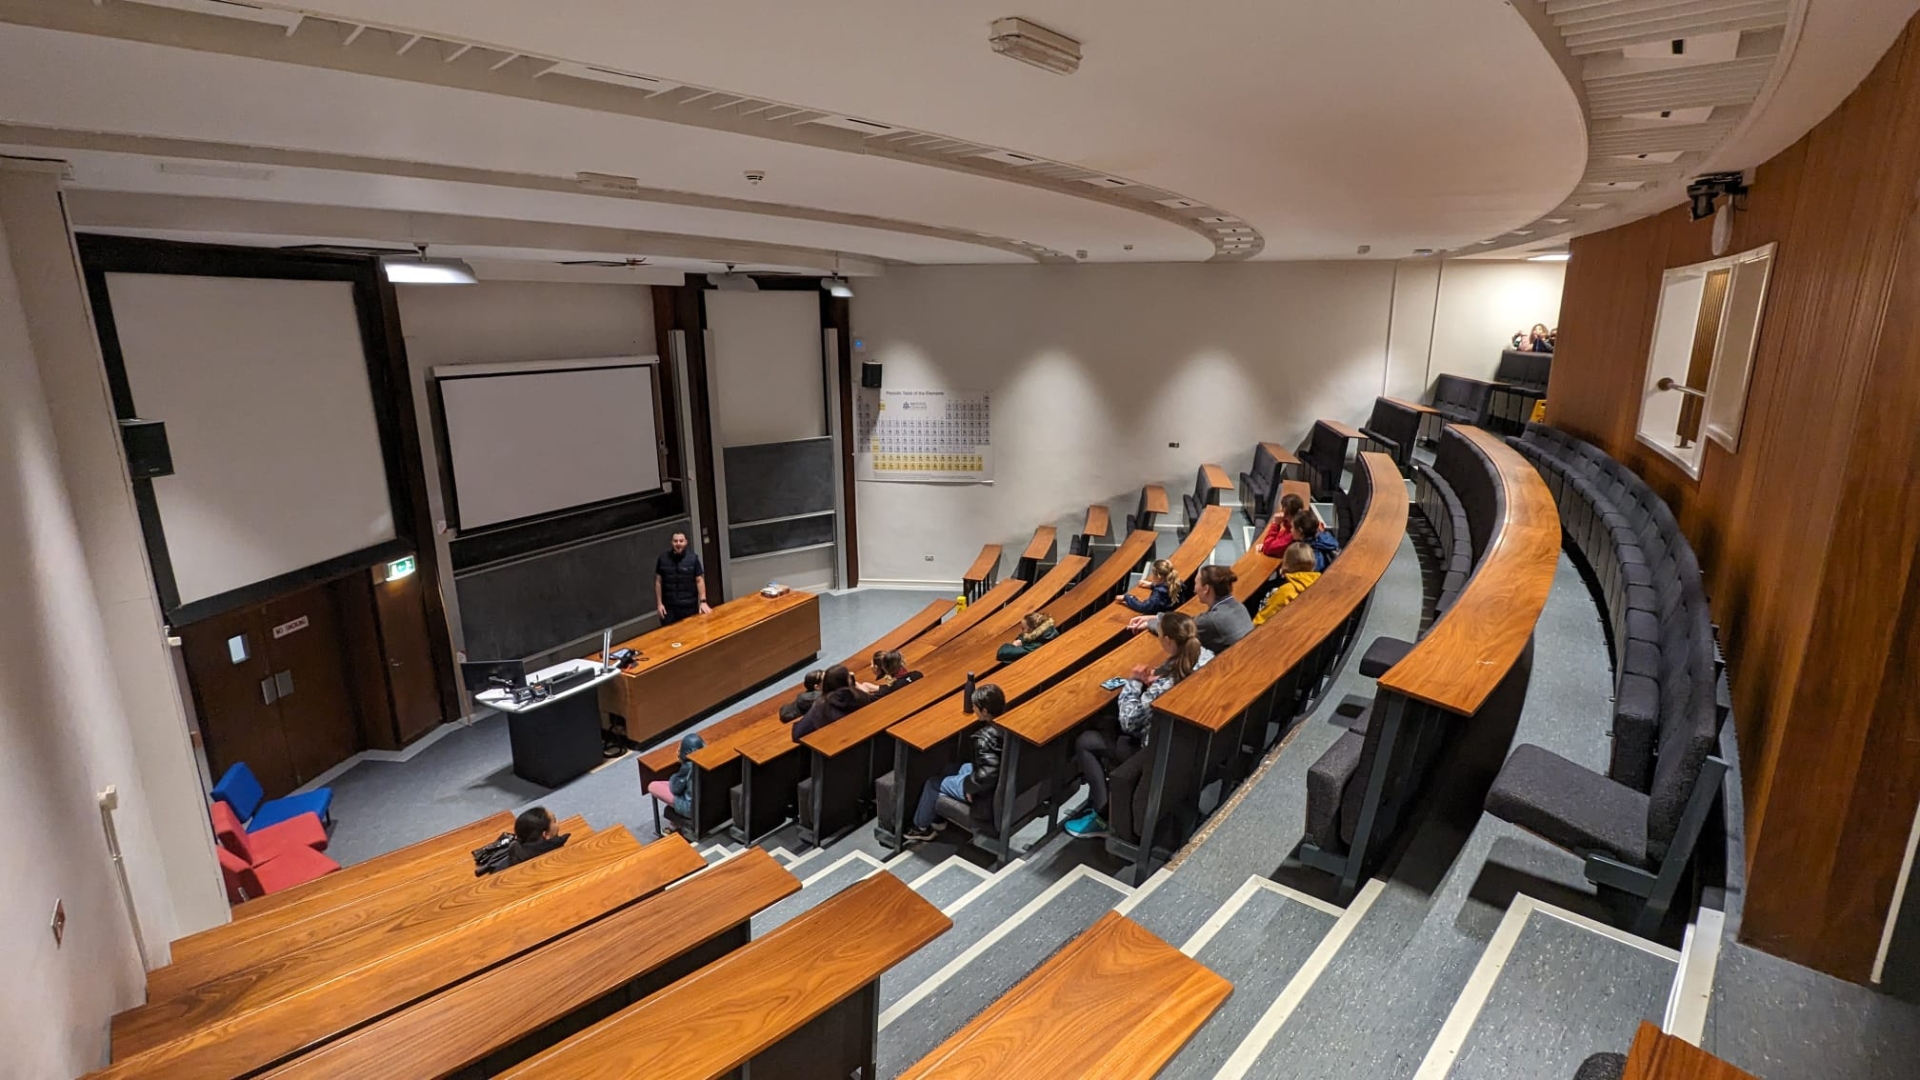 wicketz participants being shown around a lecture theatre whilst touring the university of bristol campus